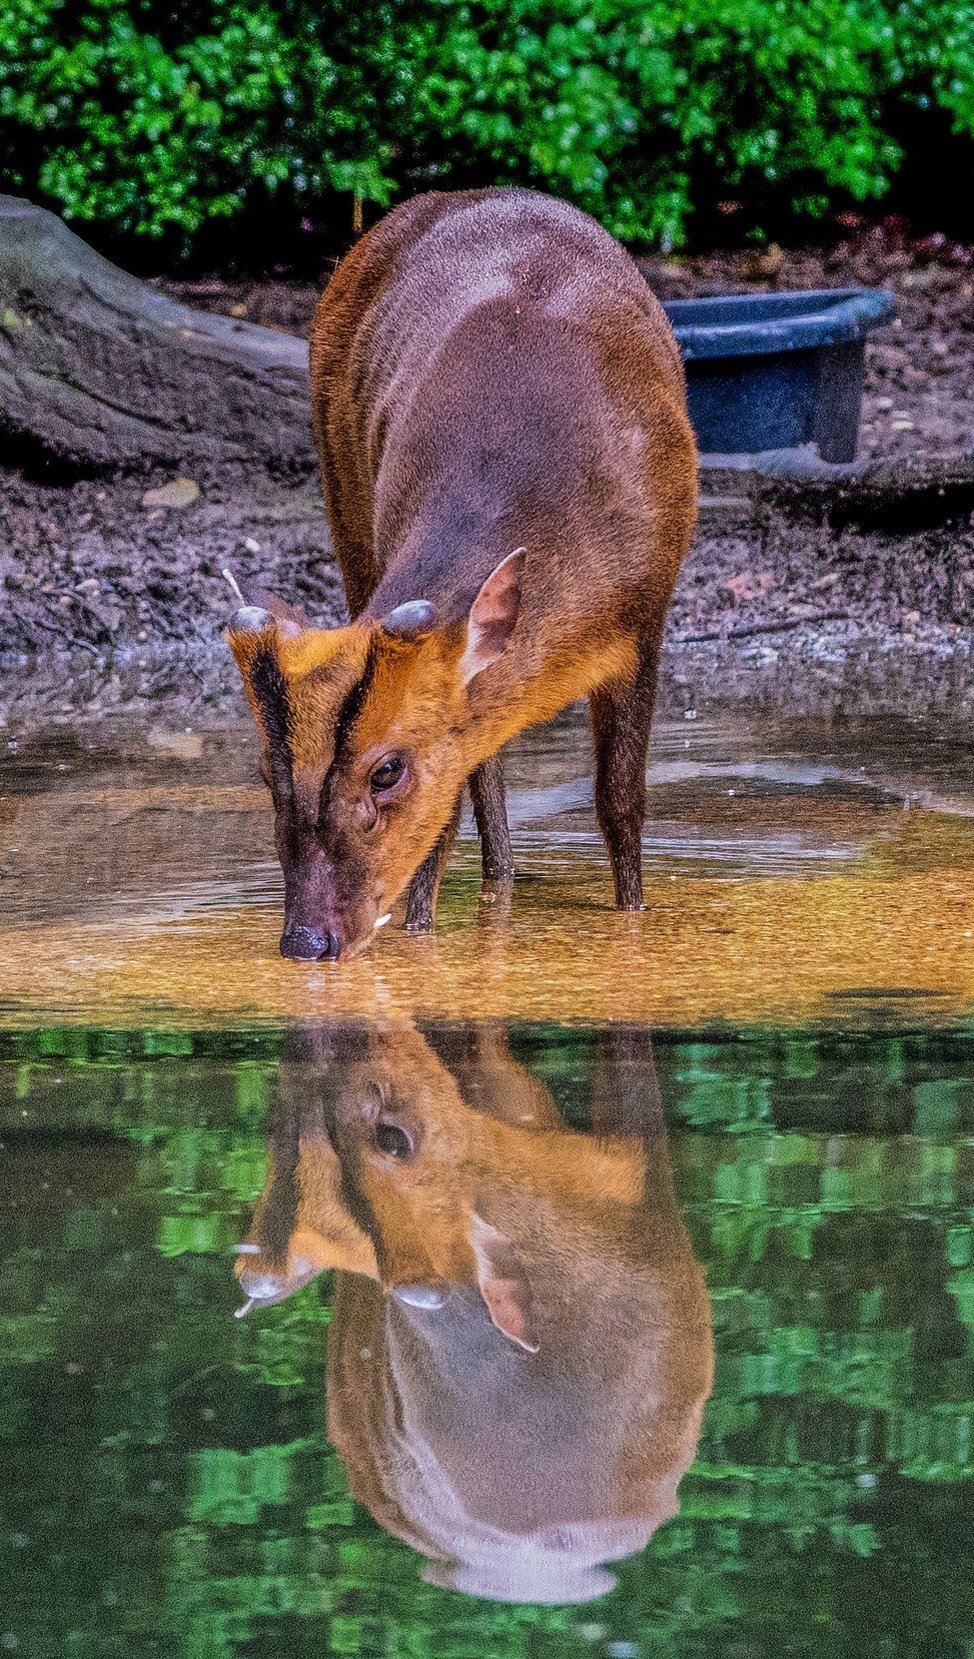 muntjac deer drinking from a pond